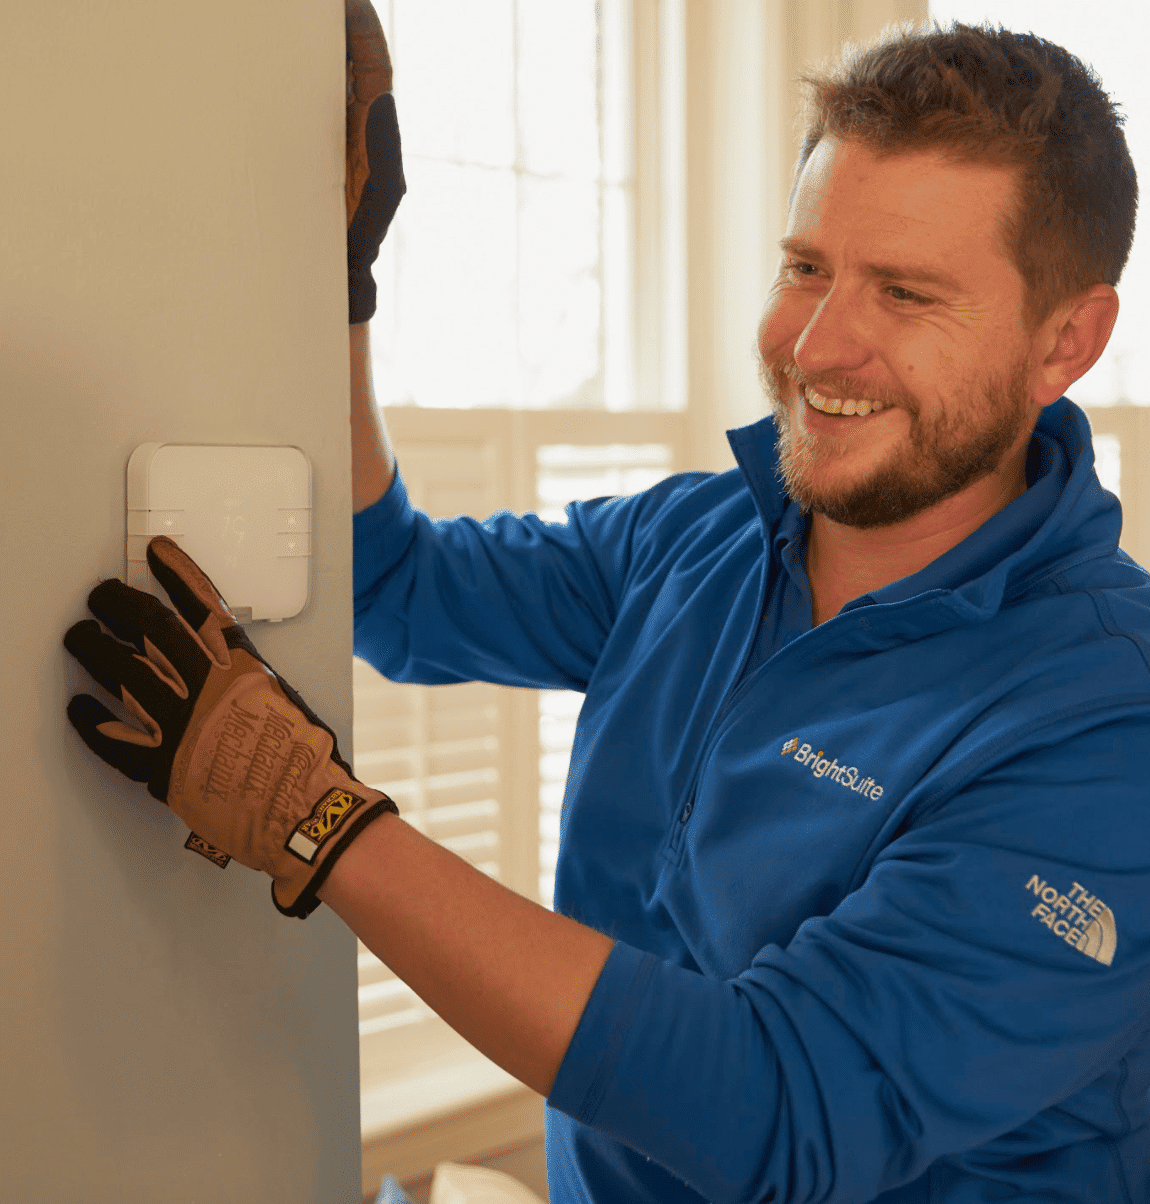 A BrightSuite employee installs a smart home security device in a home.